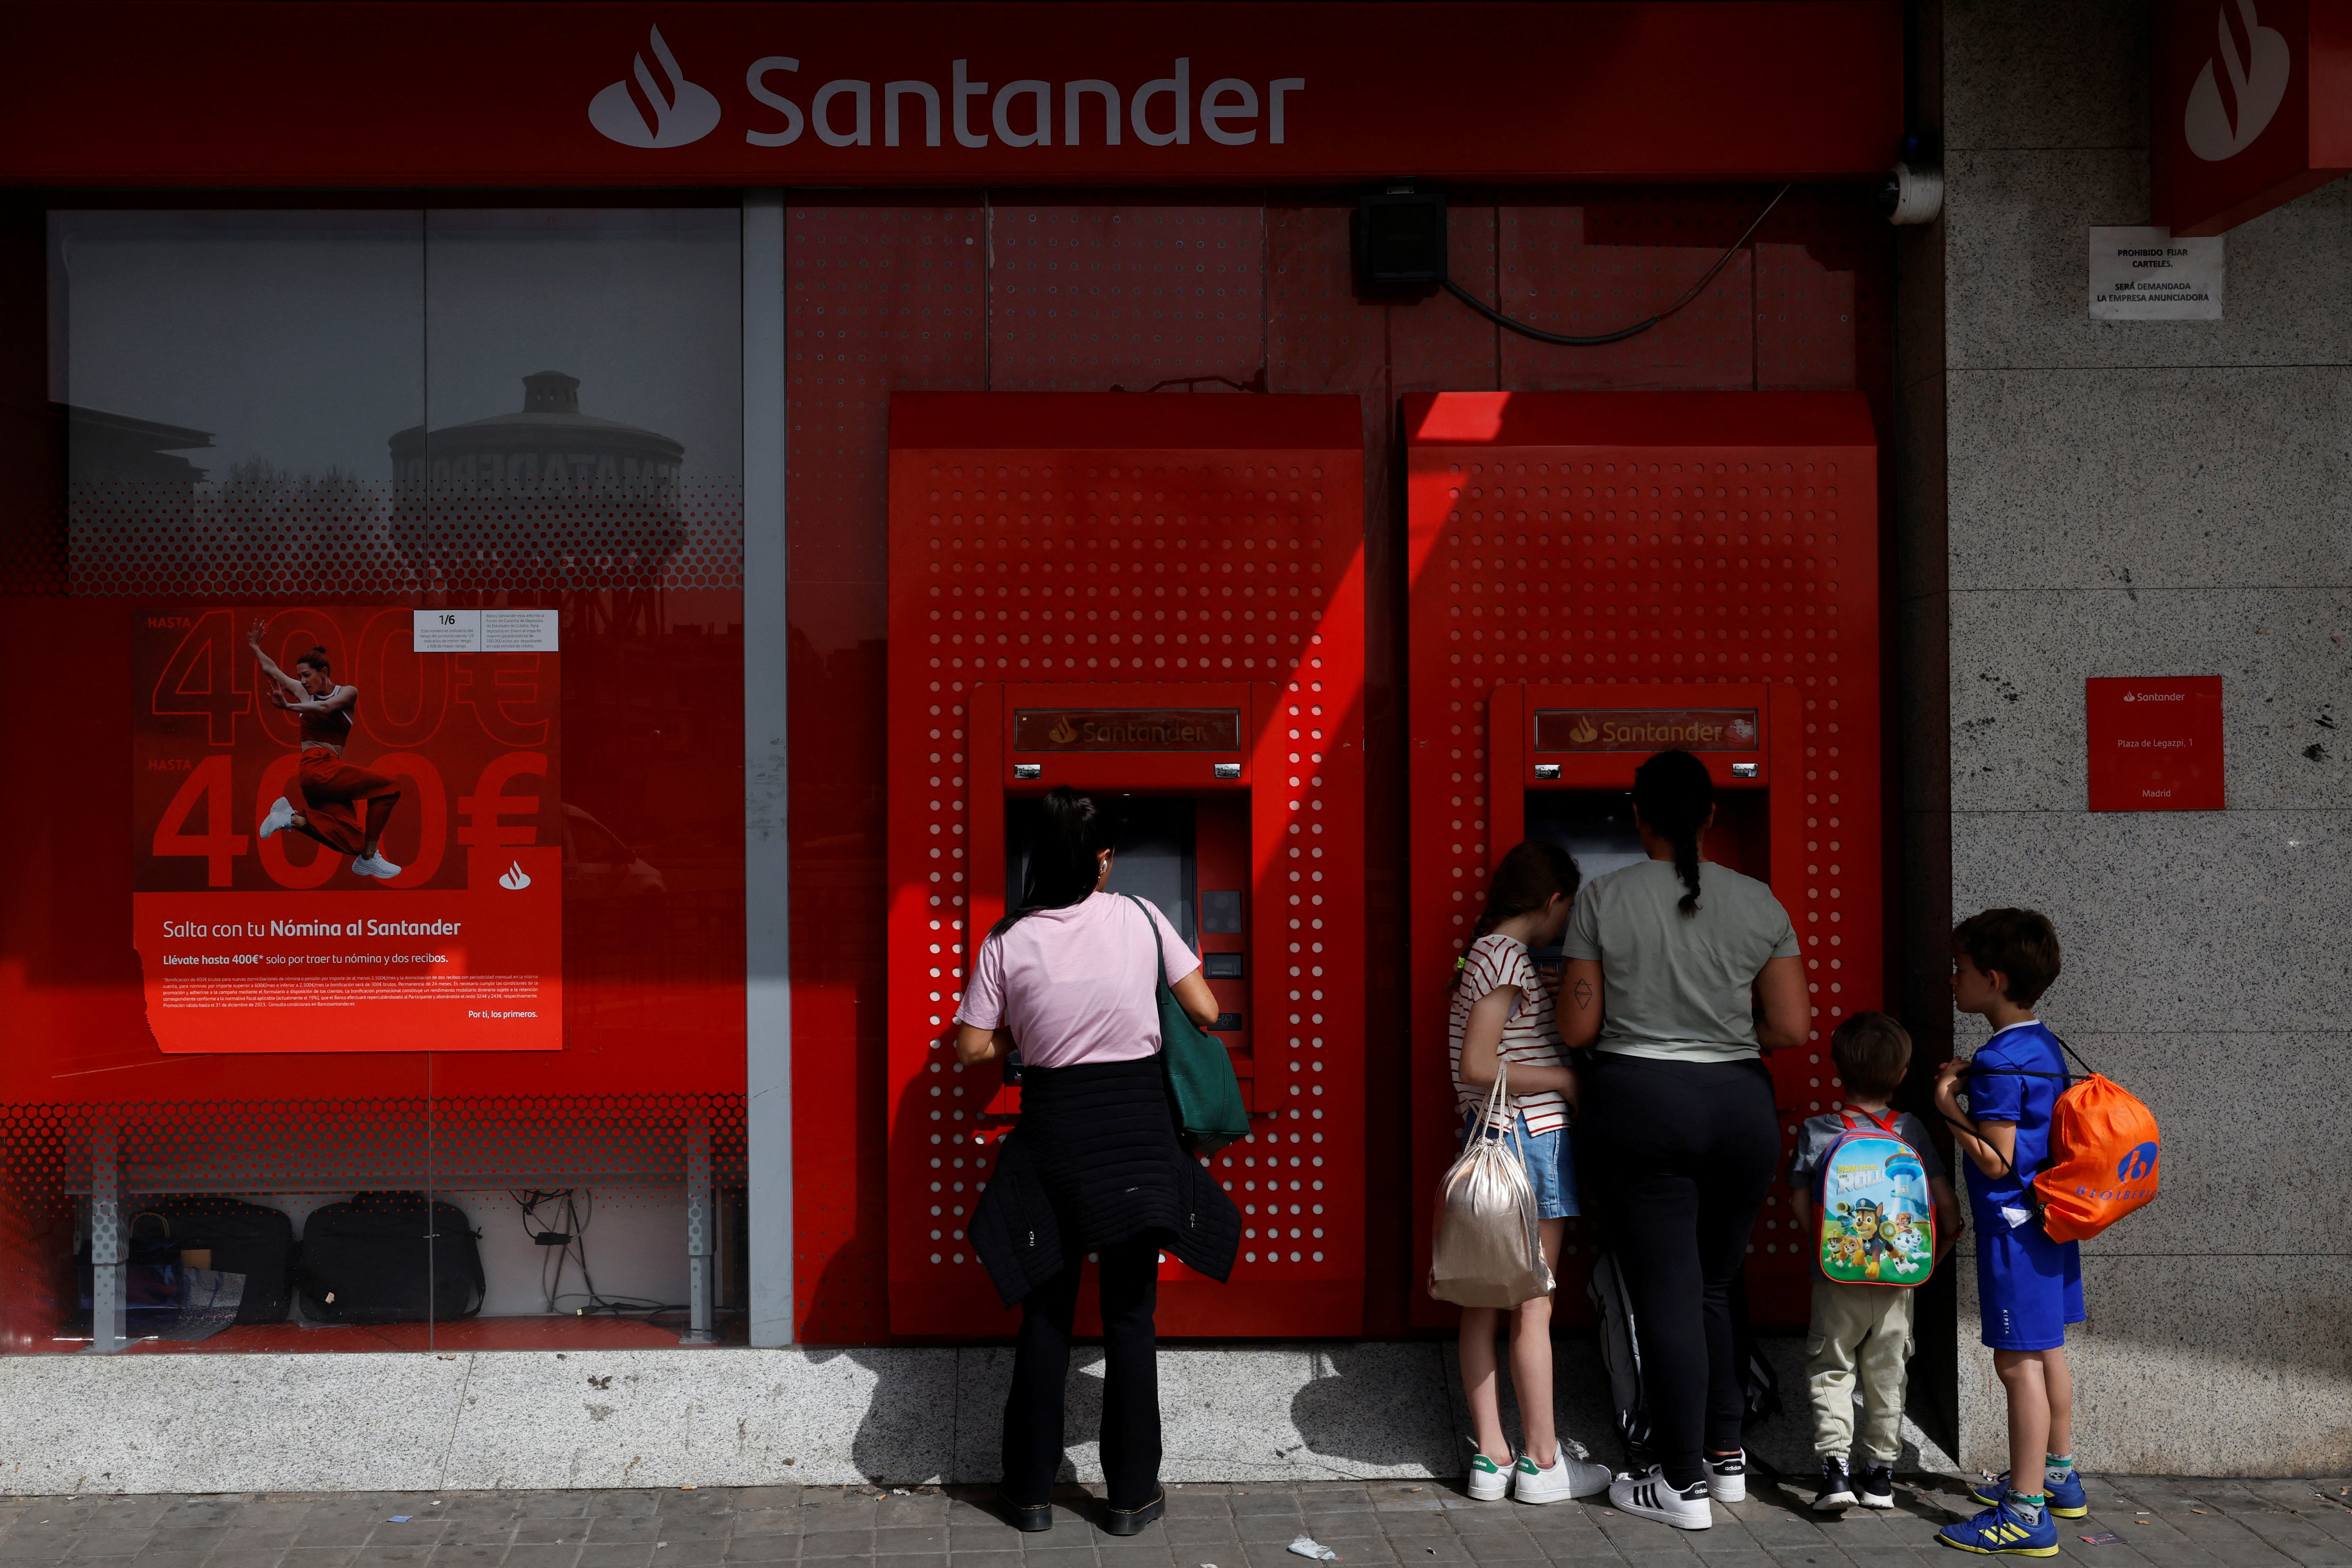 People use an ATM machine at a Santander bank branch in Madrid